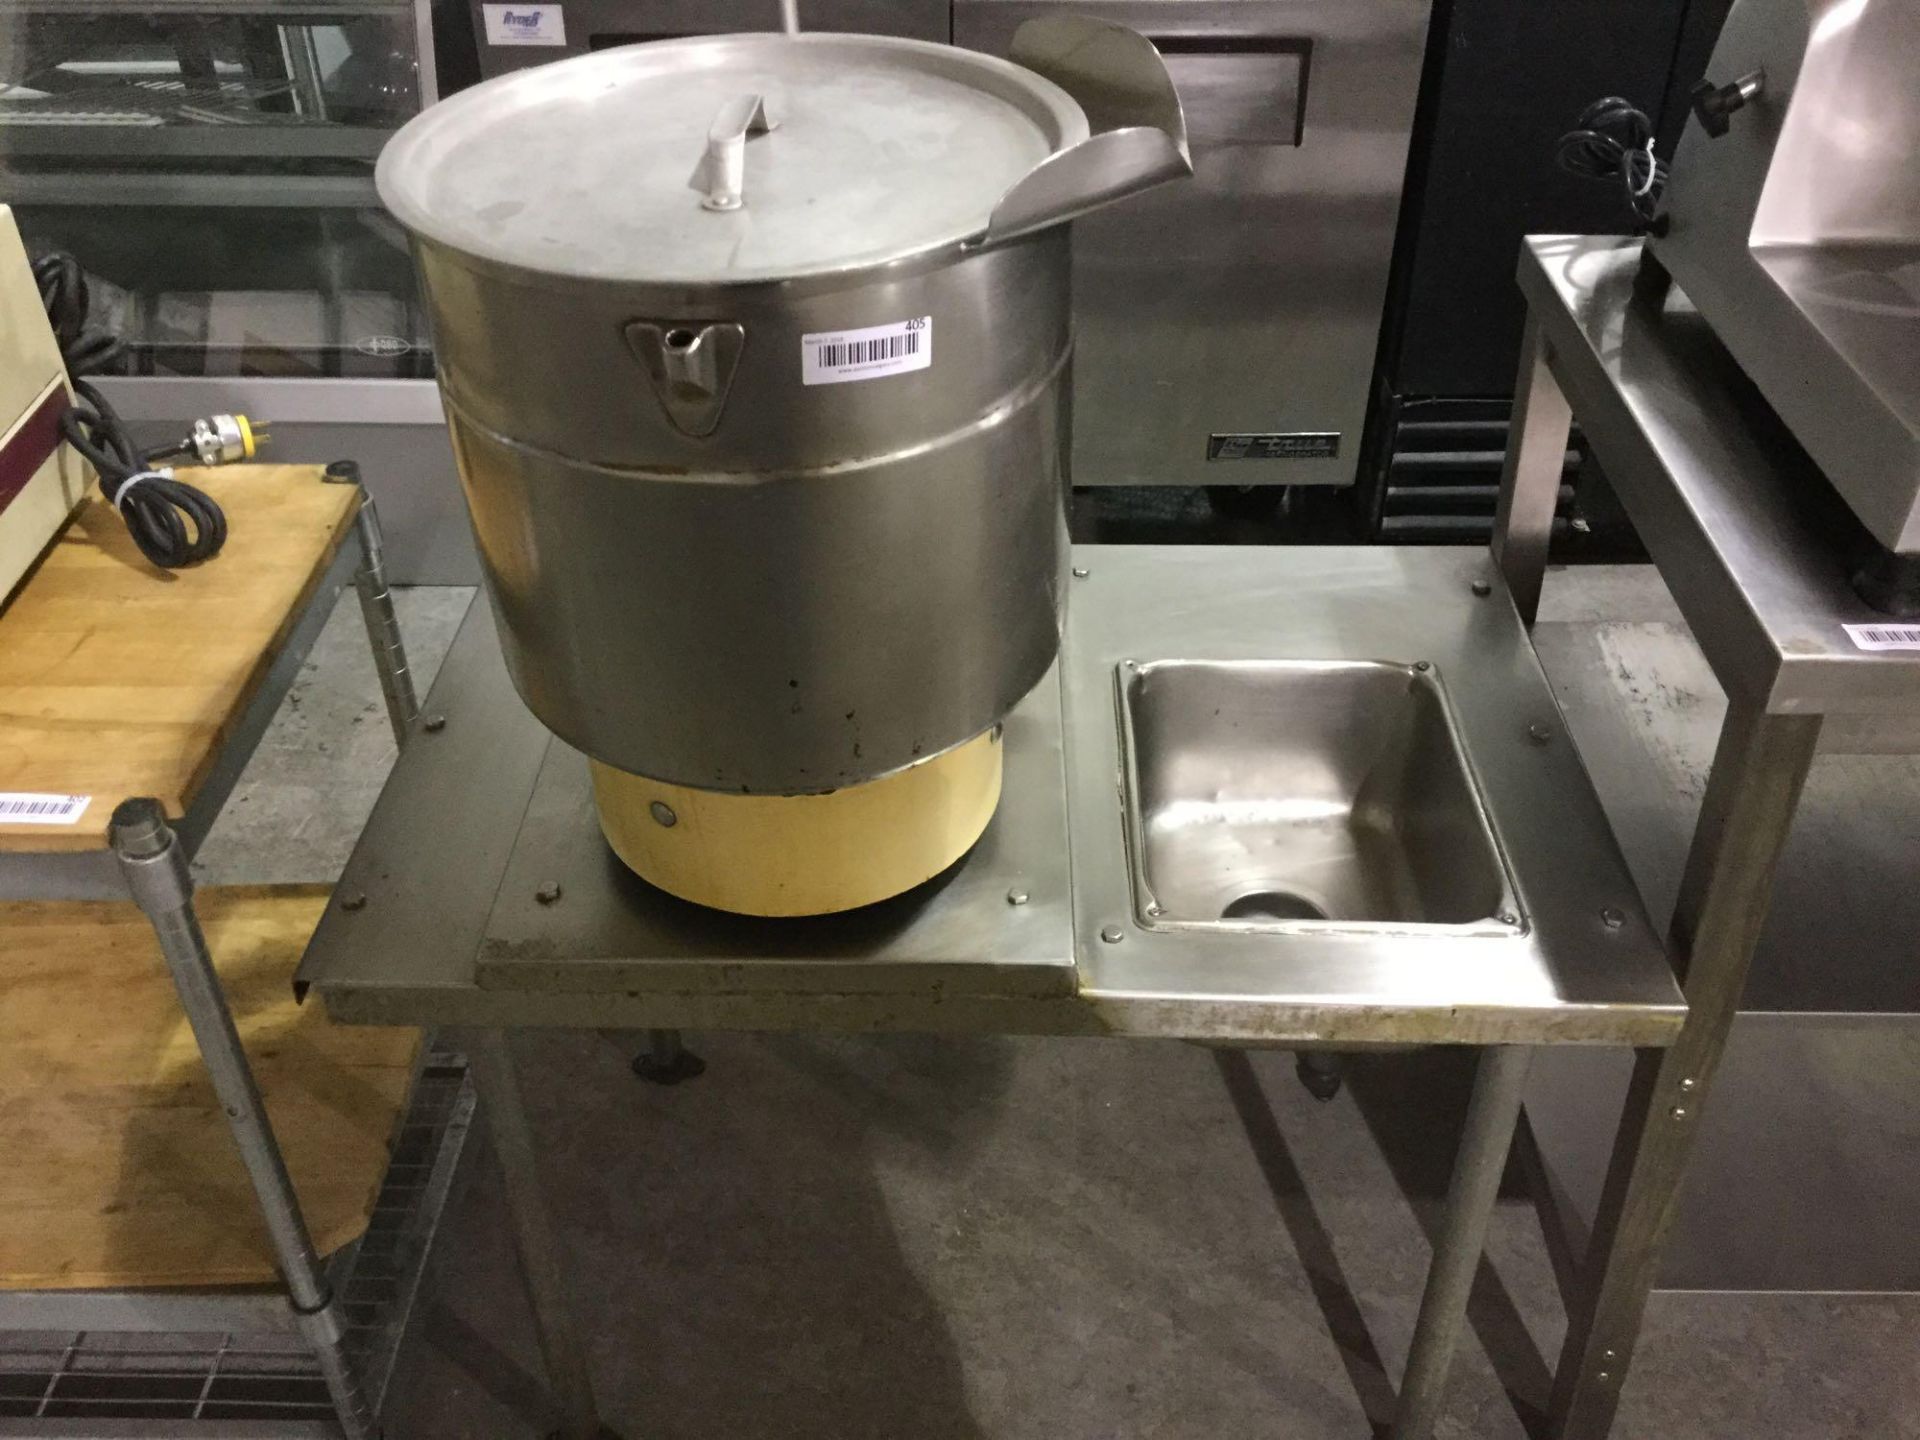 Coulter Steam Kettle With Stand and Sink - Model ETT.20. 304